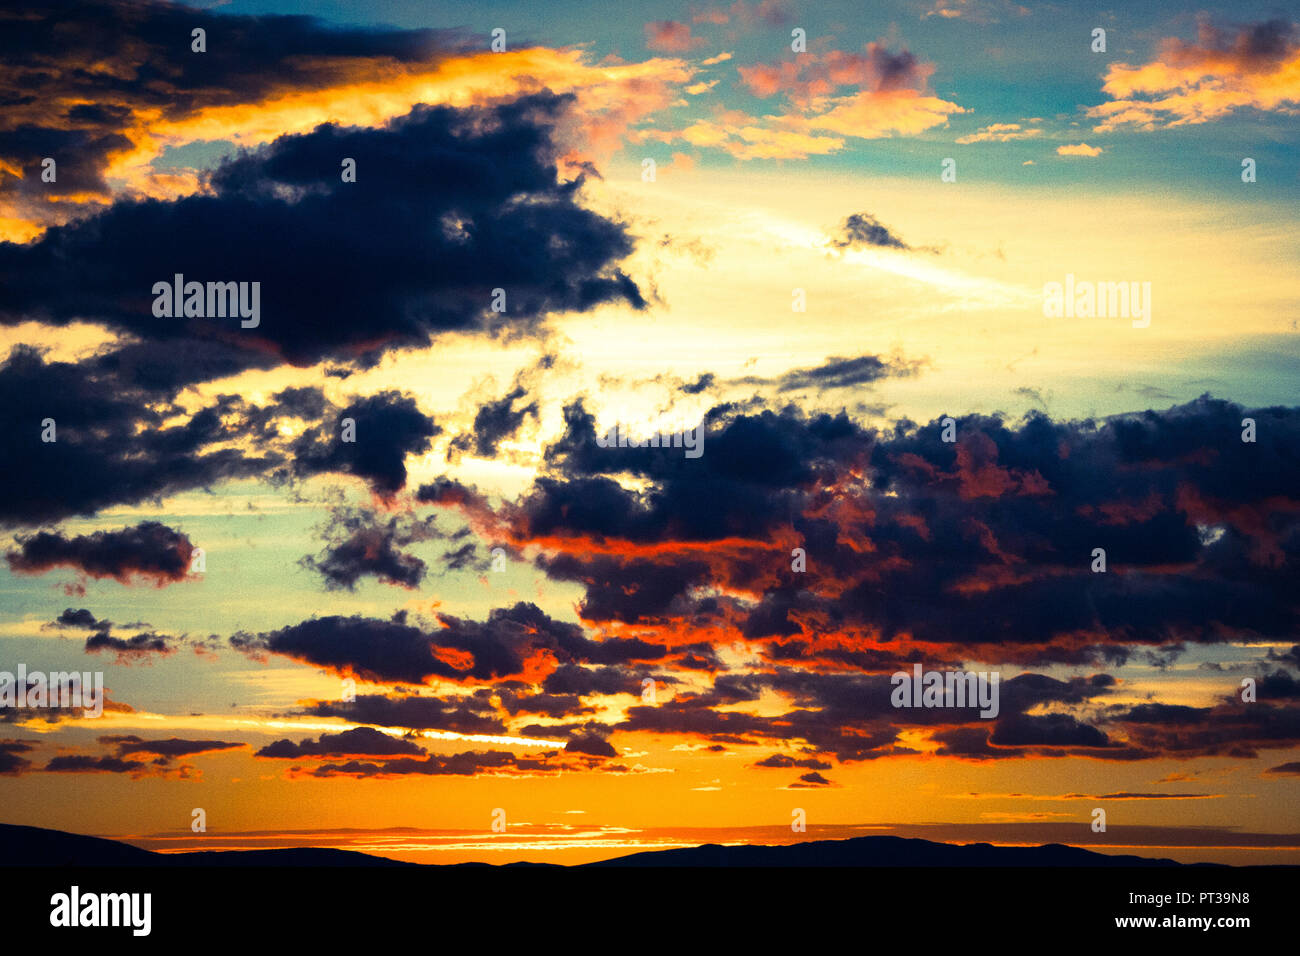 Cloudy sky with setting sun, play of colours, thunderclouds Stock Photo